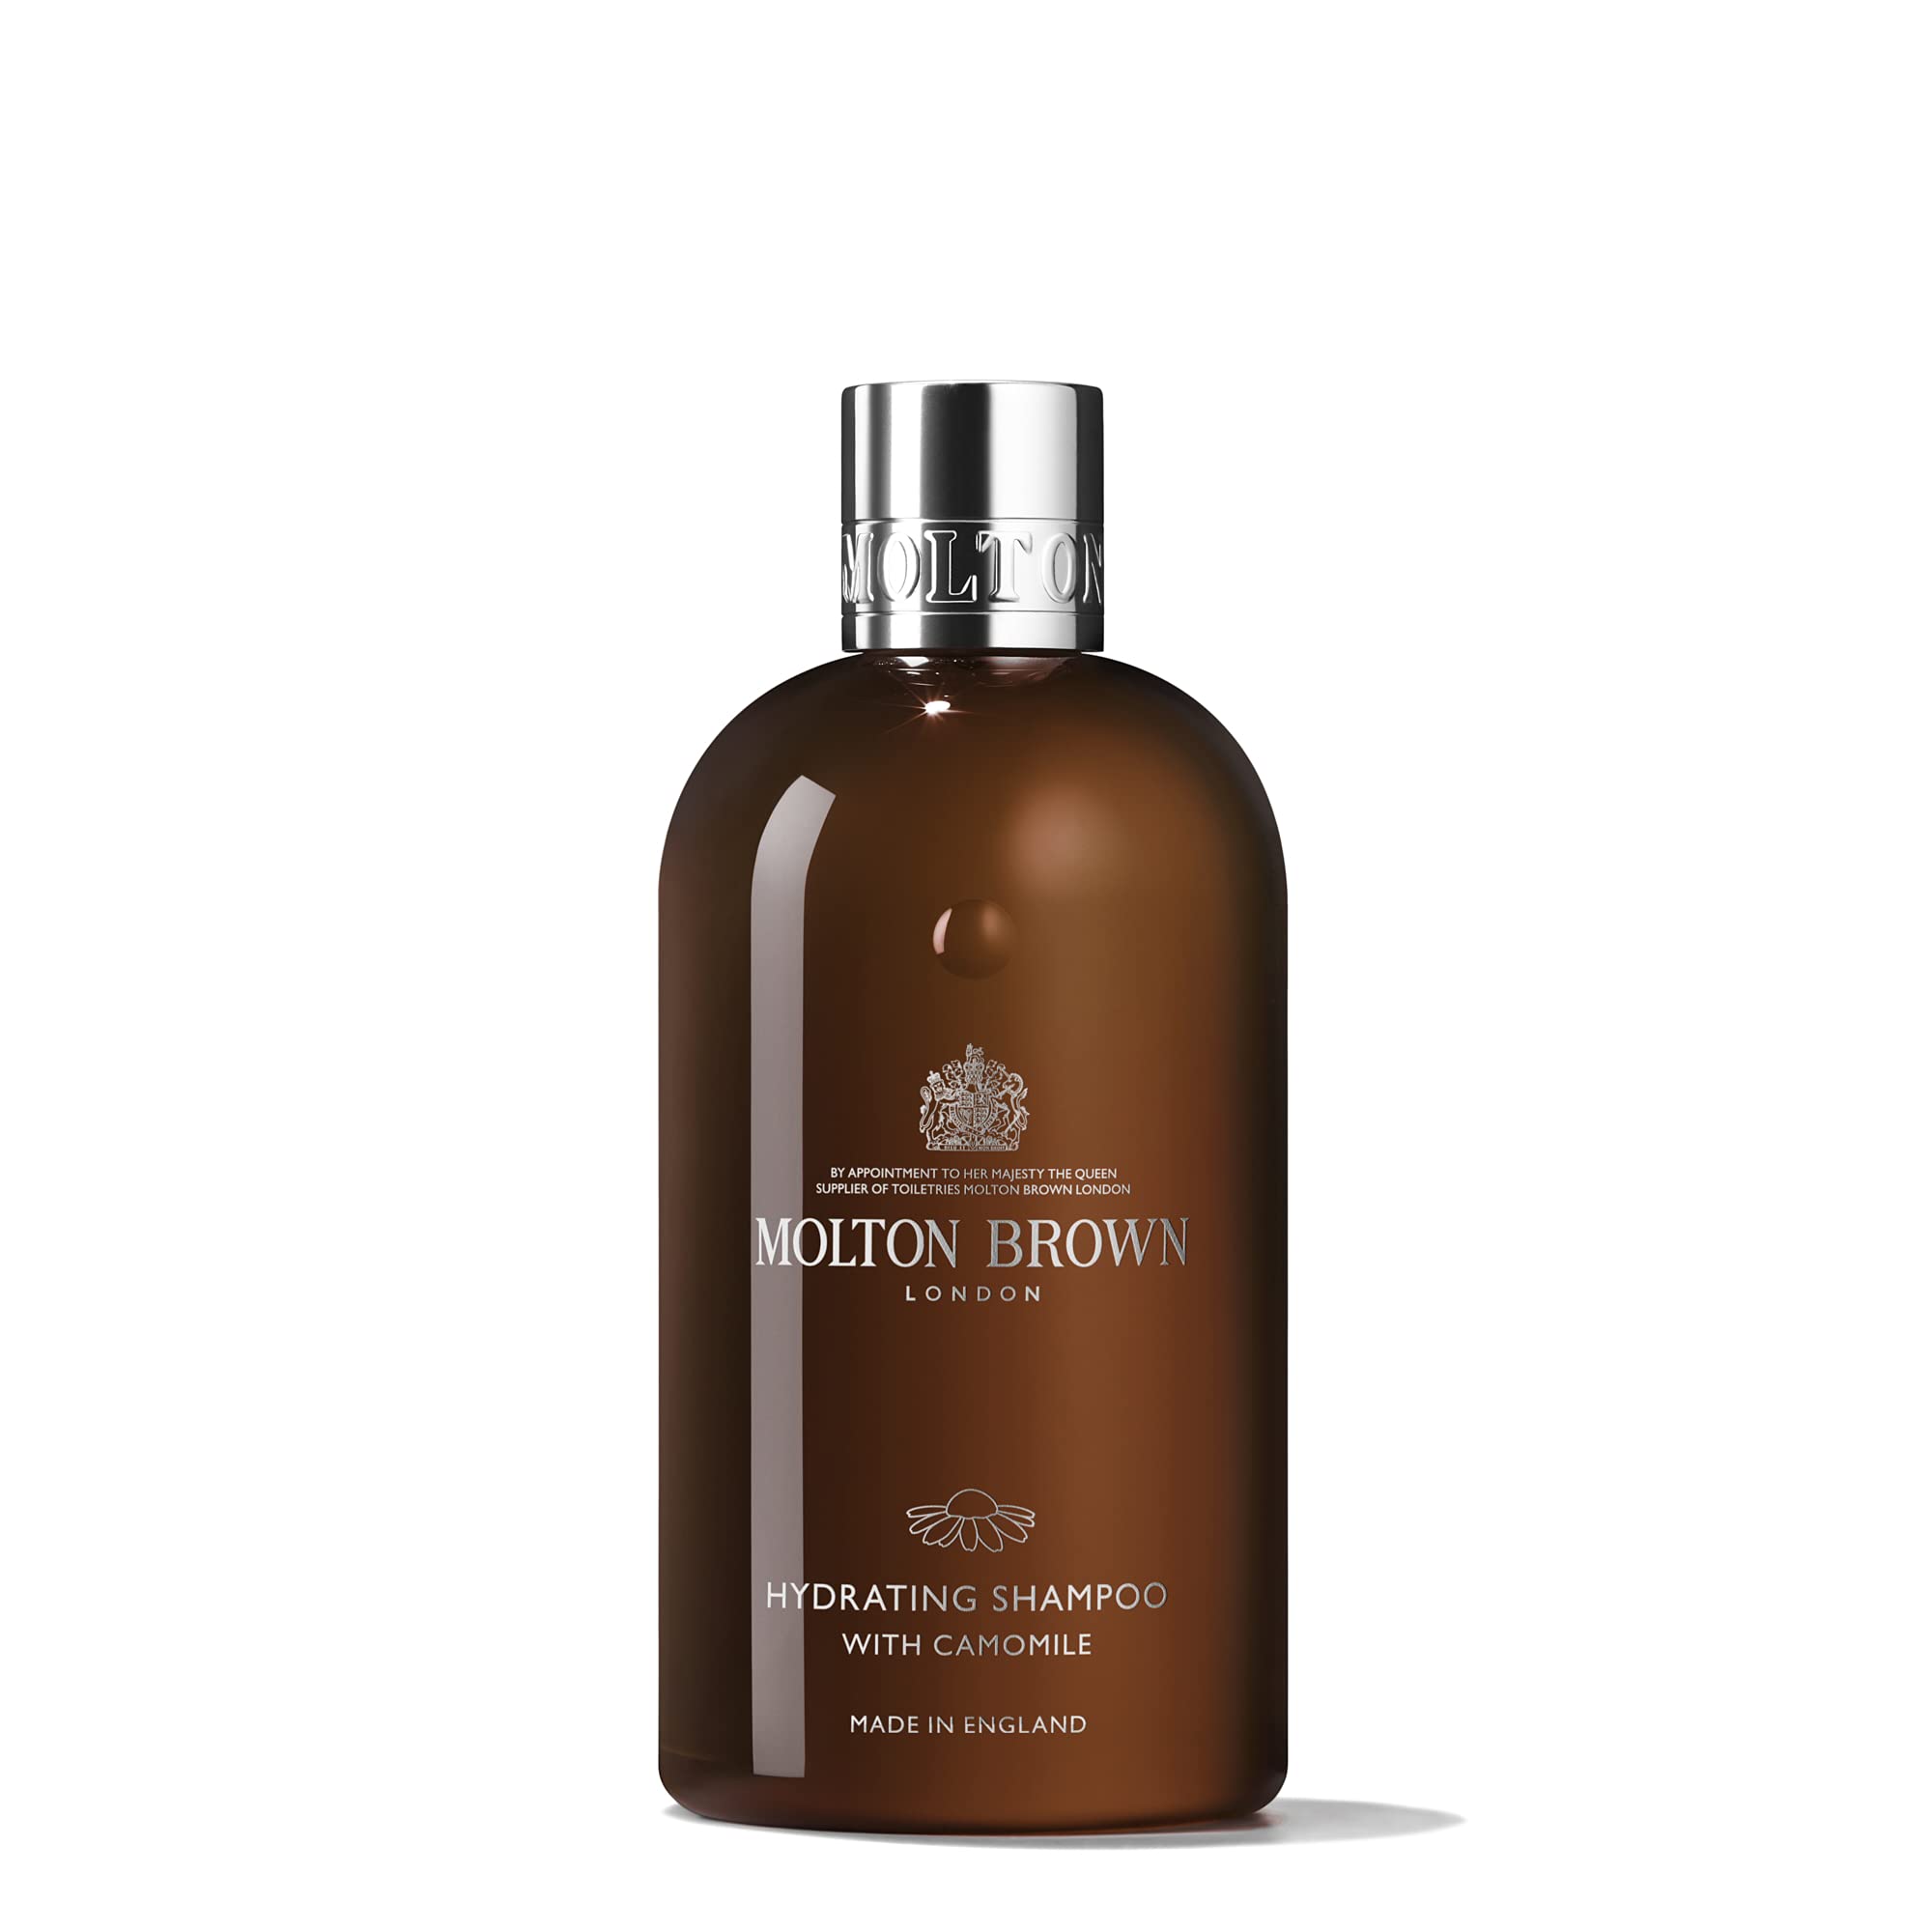 Molton Brown Hydrating Shampoo with Camomile 300 ml